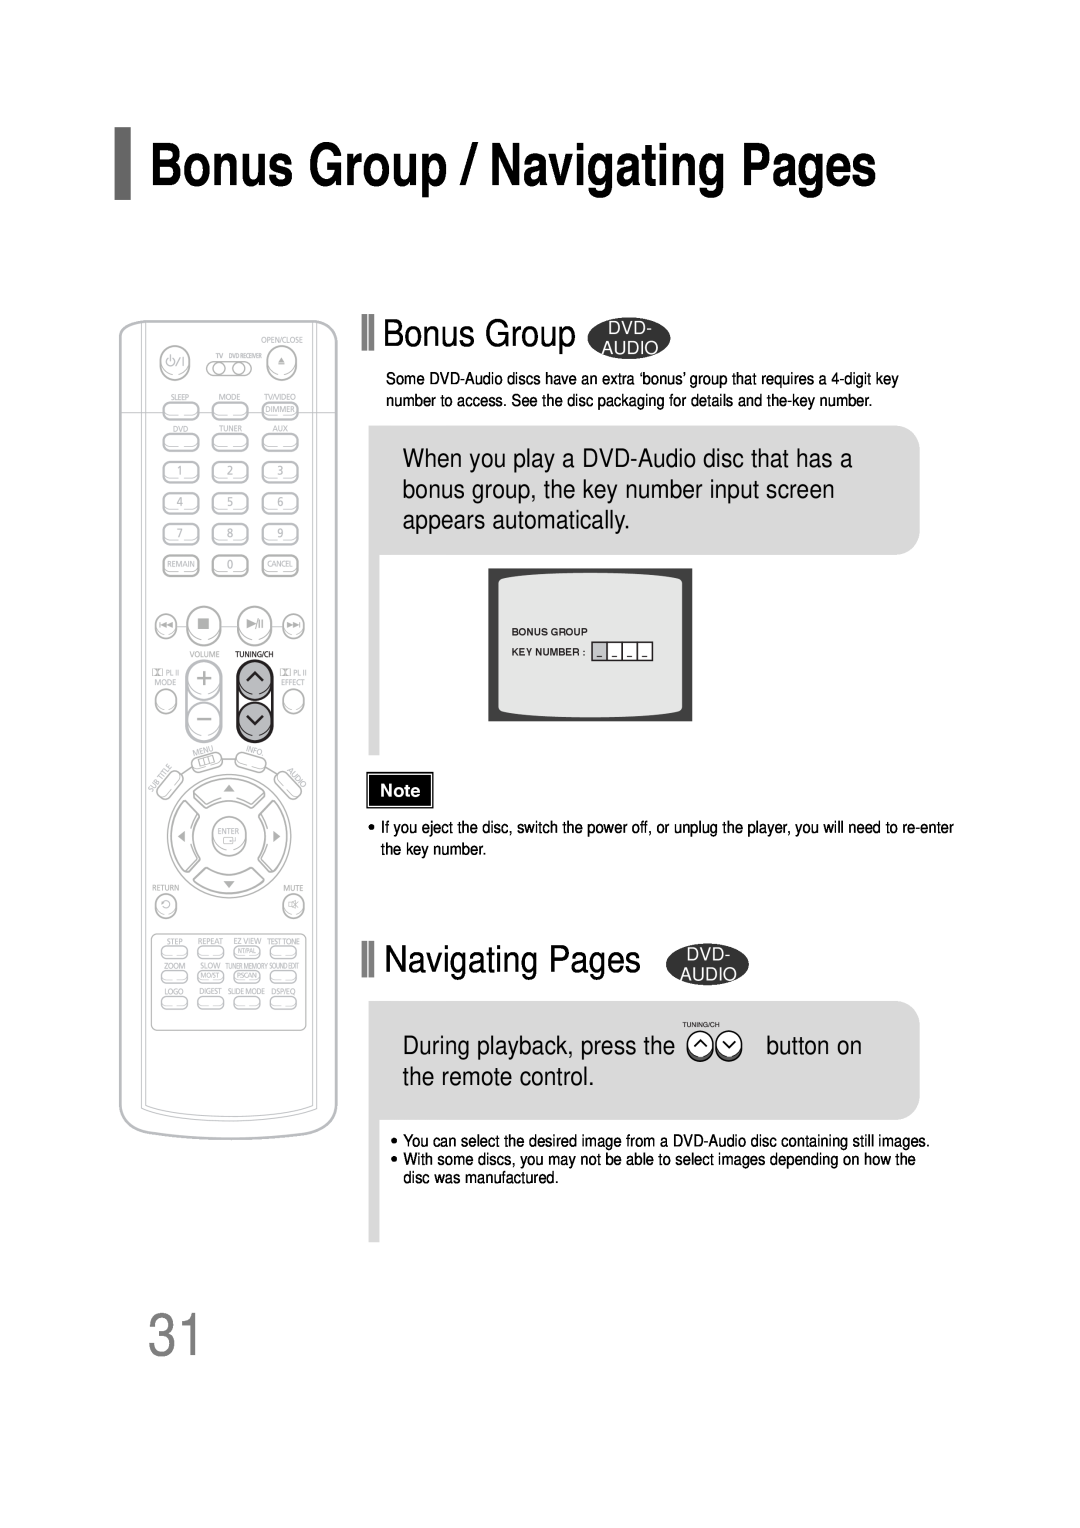 Samsung HT-P30 Bonus Group / Navigating Pages, Bonus Group DVD, the remote control, During playback, press the, button on 